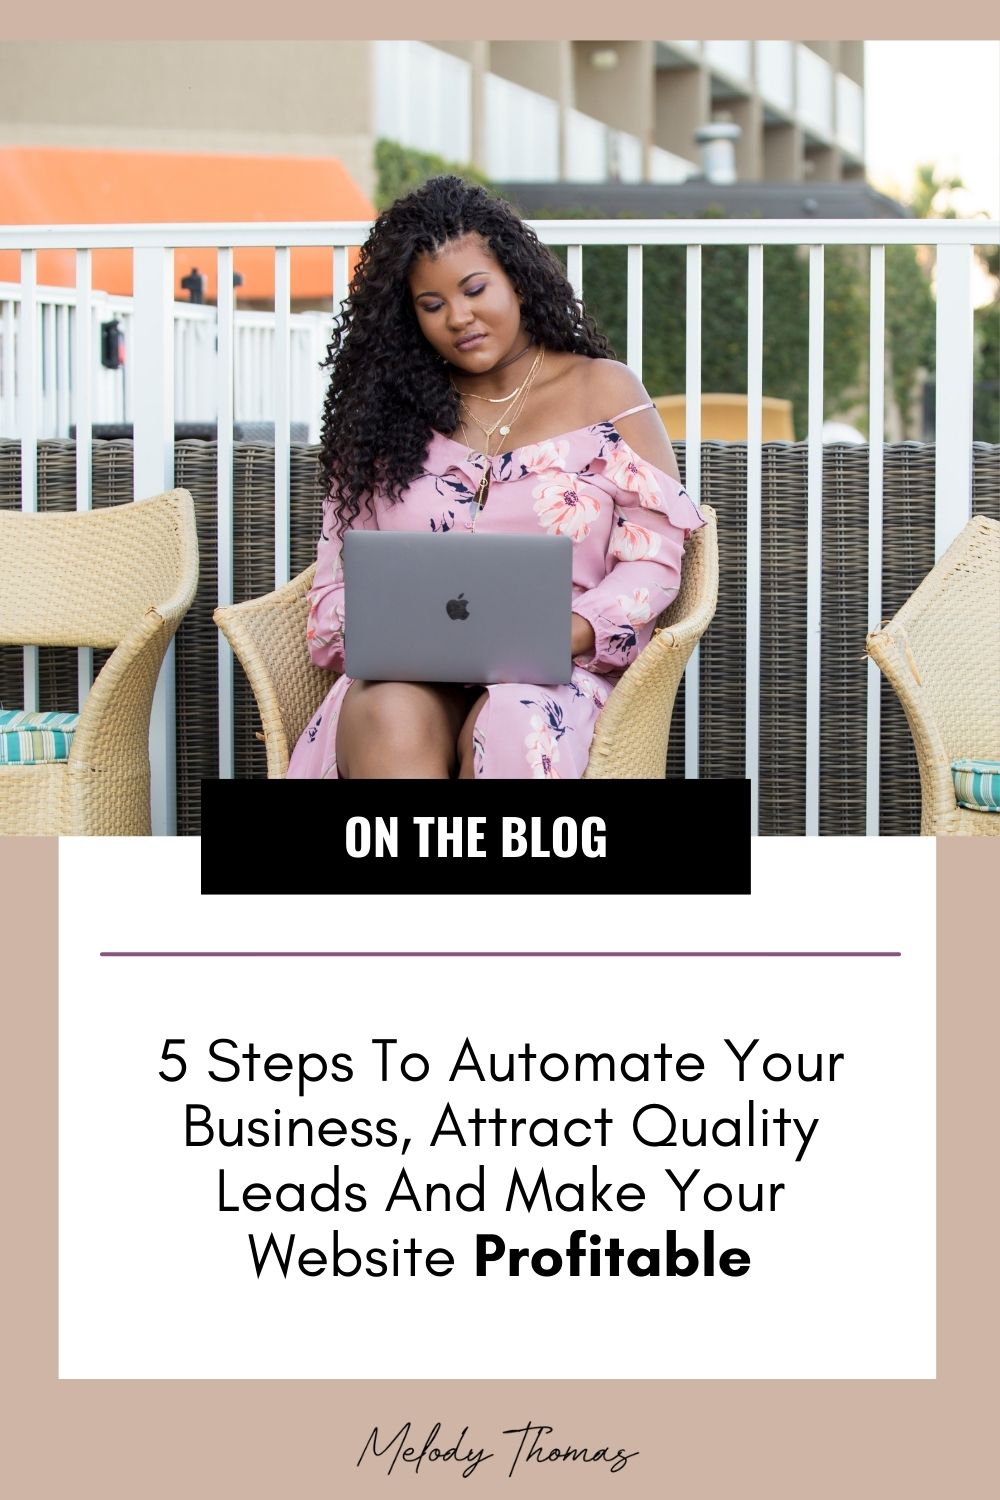 5 Steps To Automate Your Business, Attract Quality Leads And Make Your Website Profitable